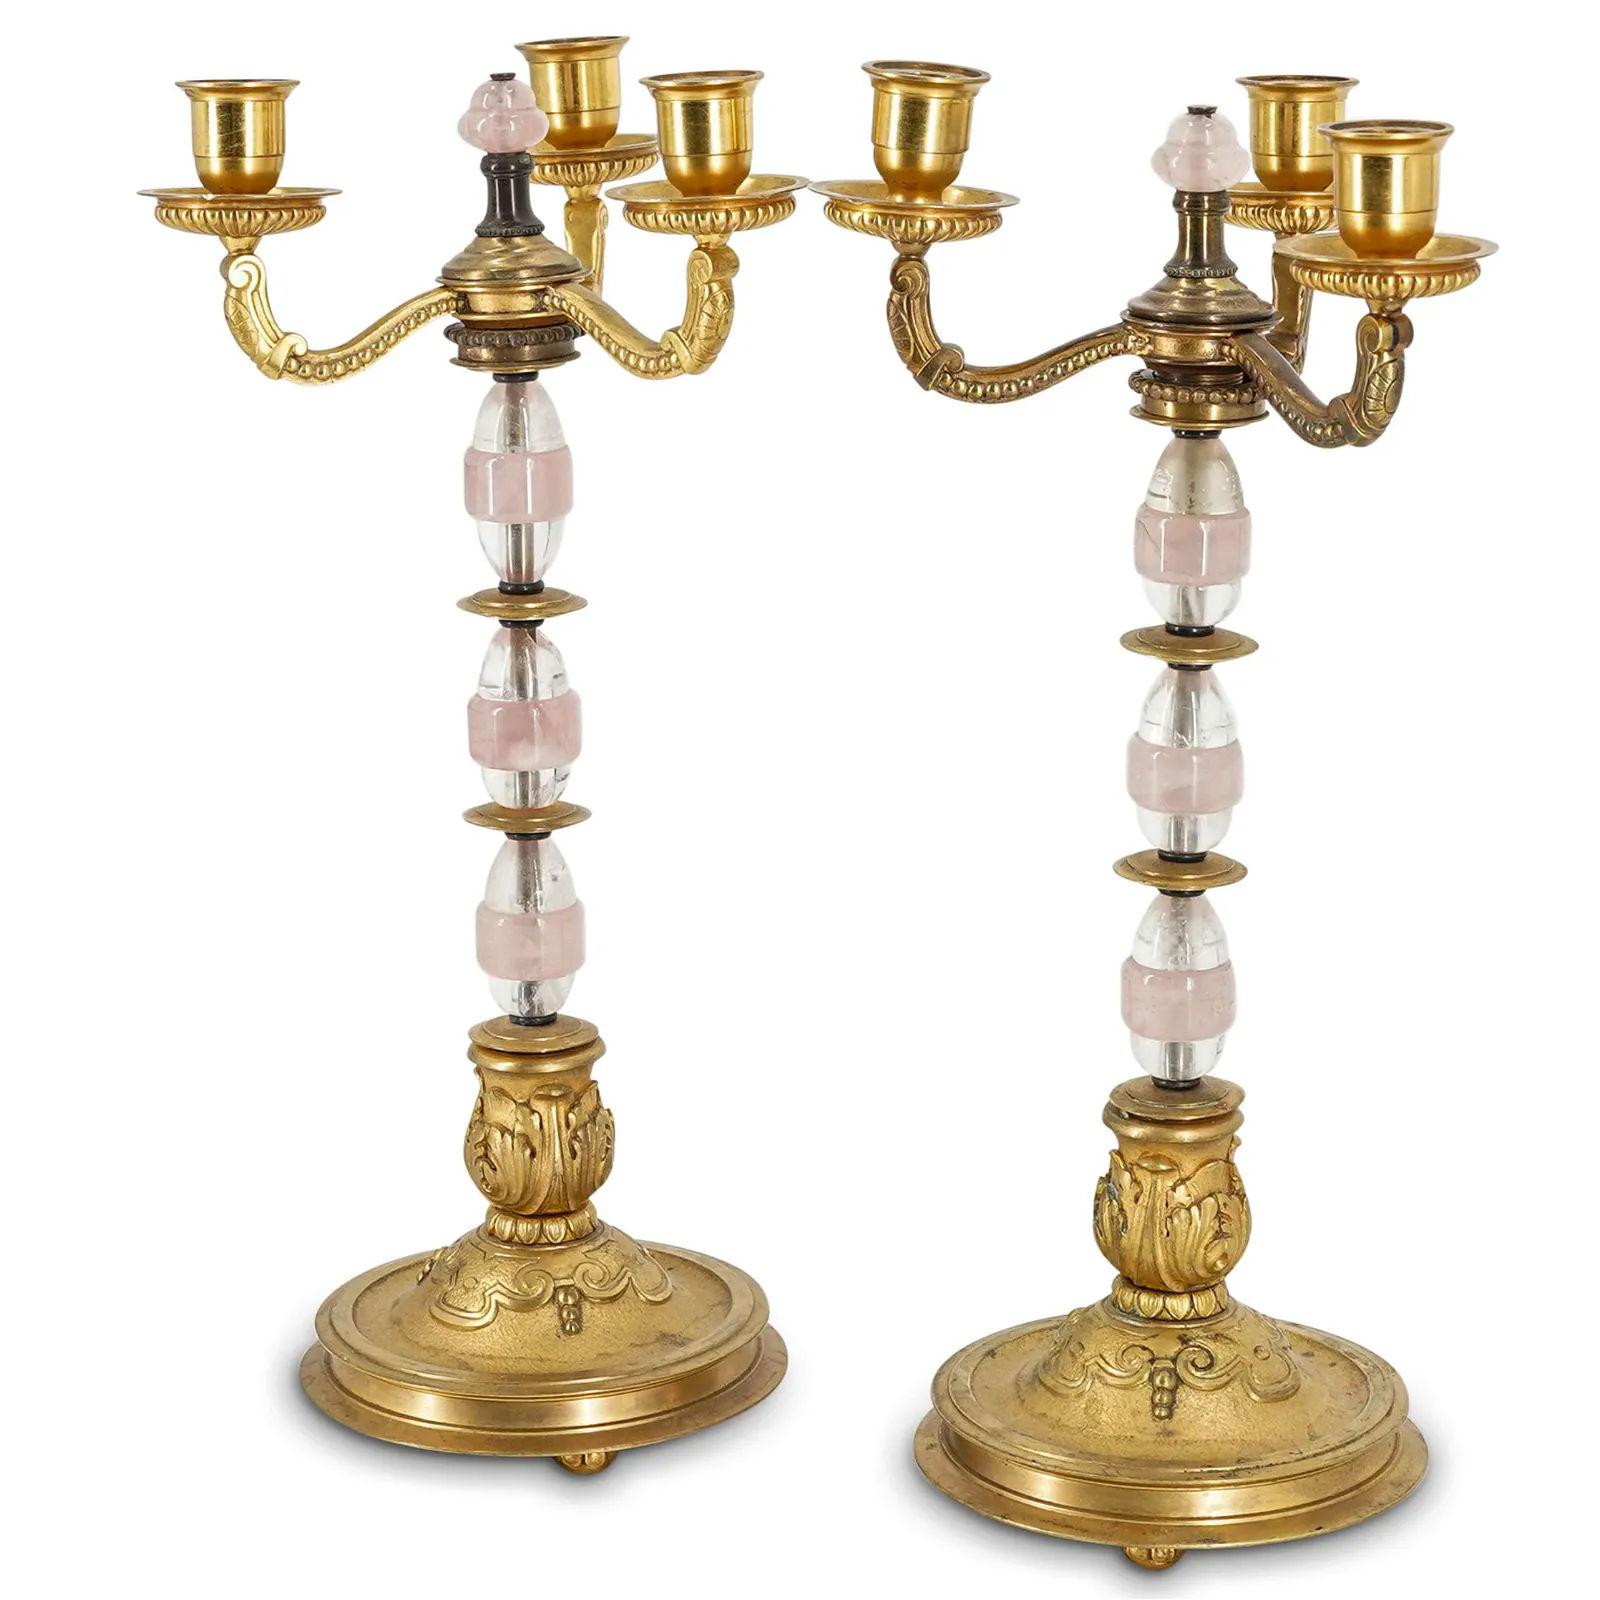 Our beautiful pair of antique gilt bronze candelabra feature standards comprised of ovoid shaped rock crystal with rose quartz bands set upon round pedestals with ball feet, and three candle arms. Apparently unsigned. Likely of northern European